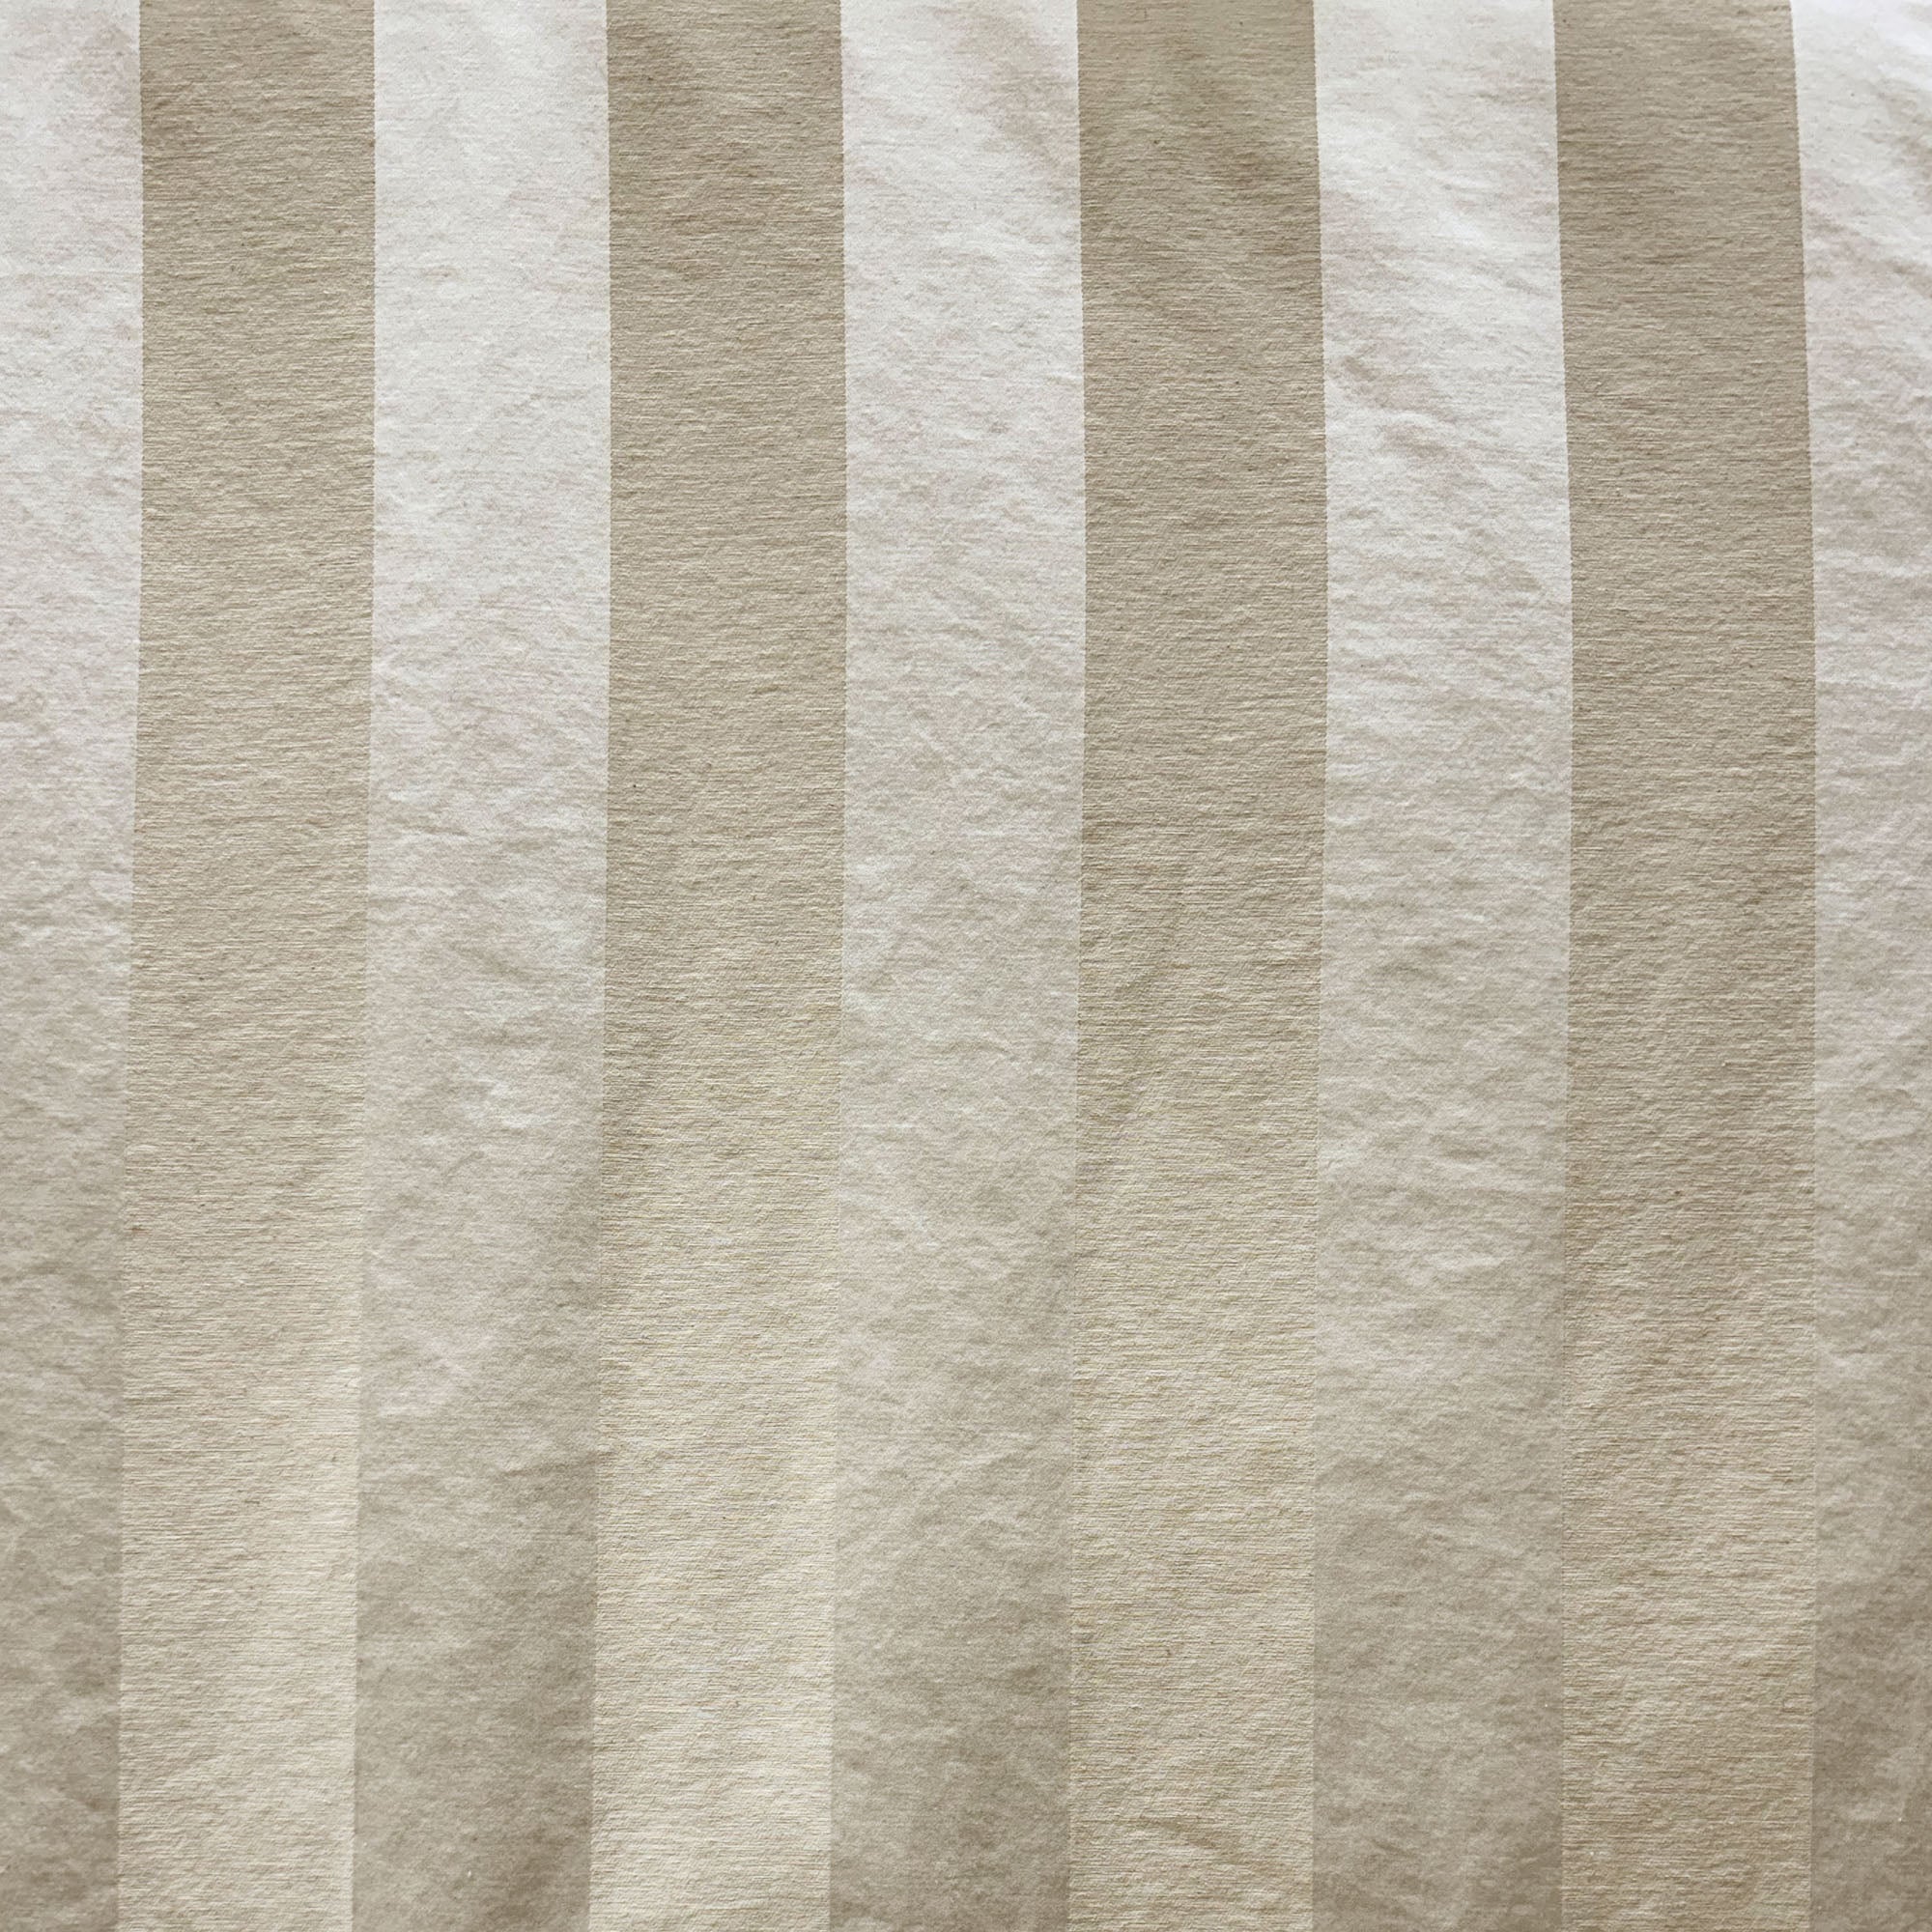 Lulu Fabric | Embossed Large Striped Patter